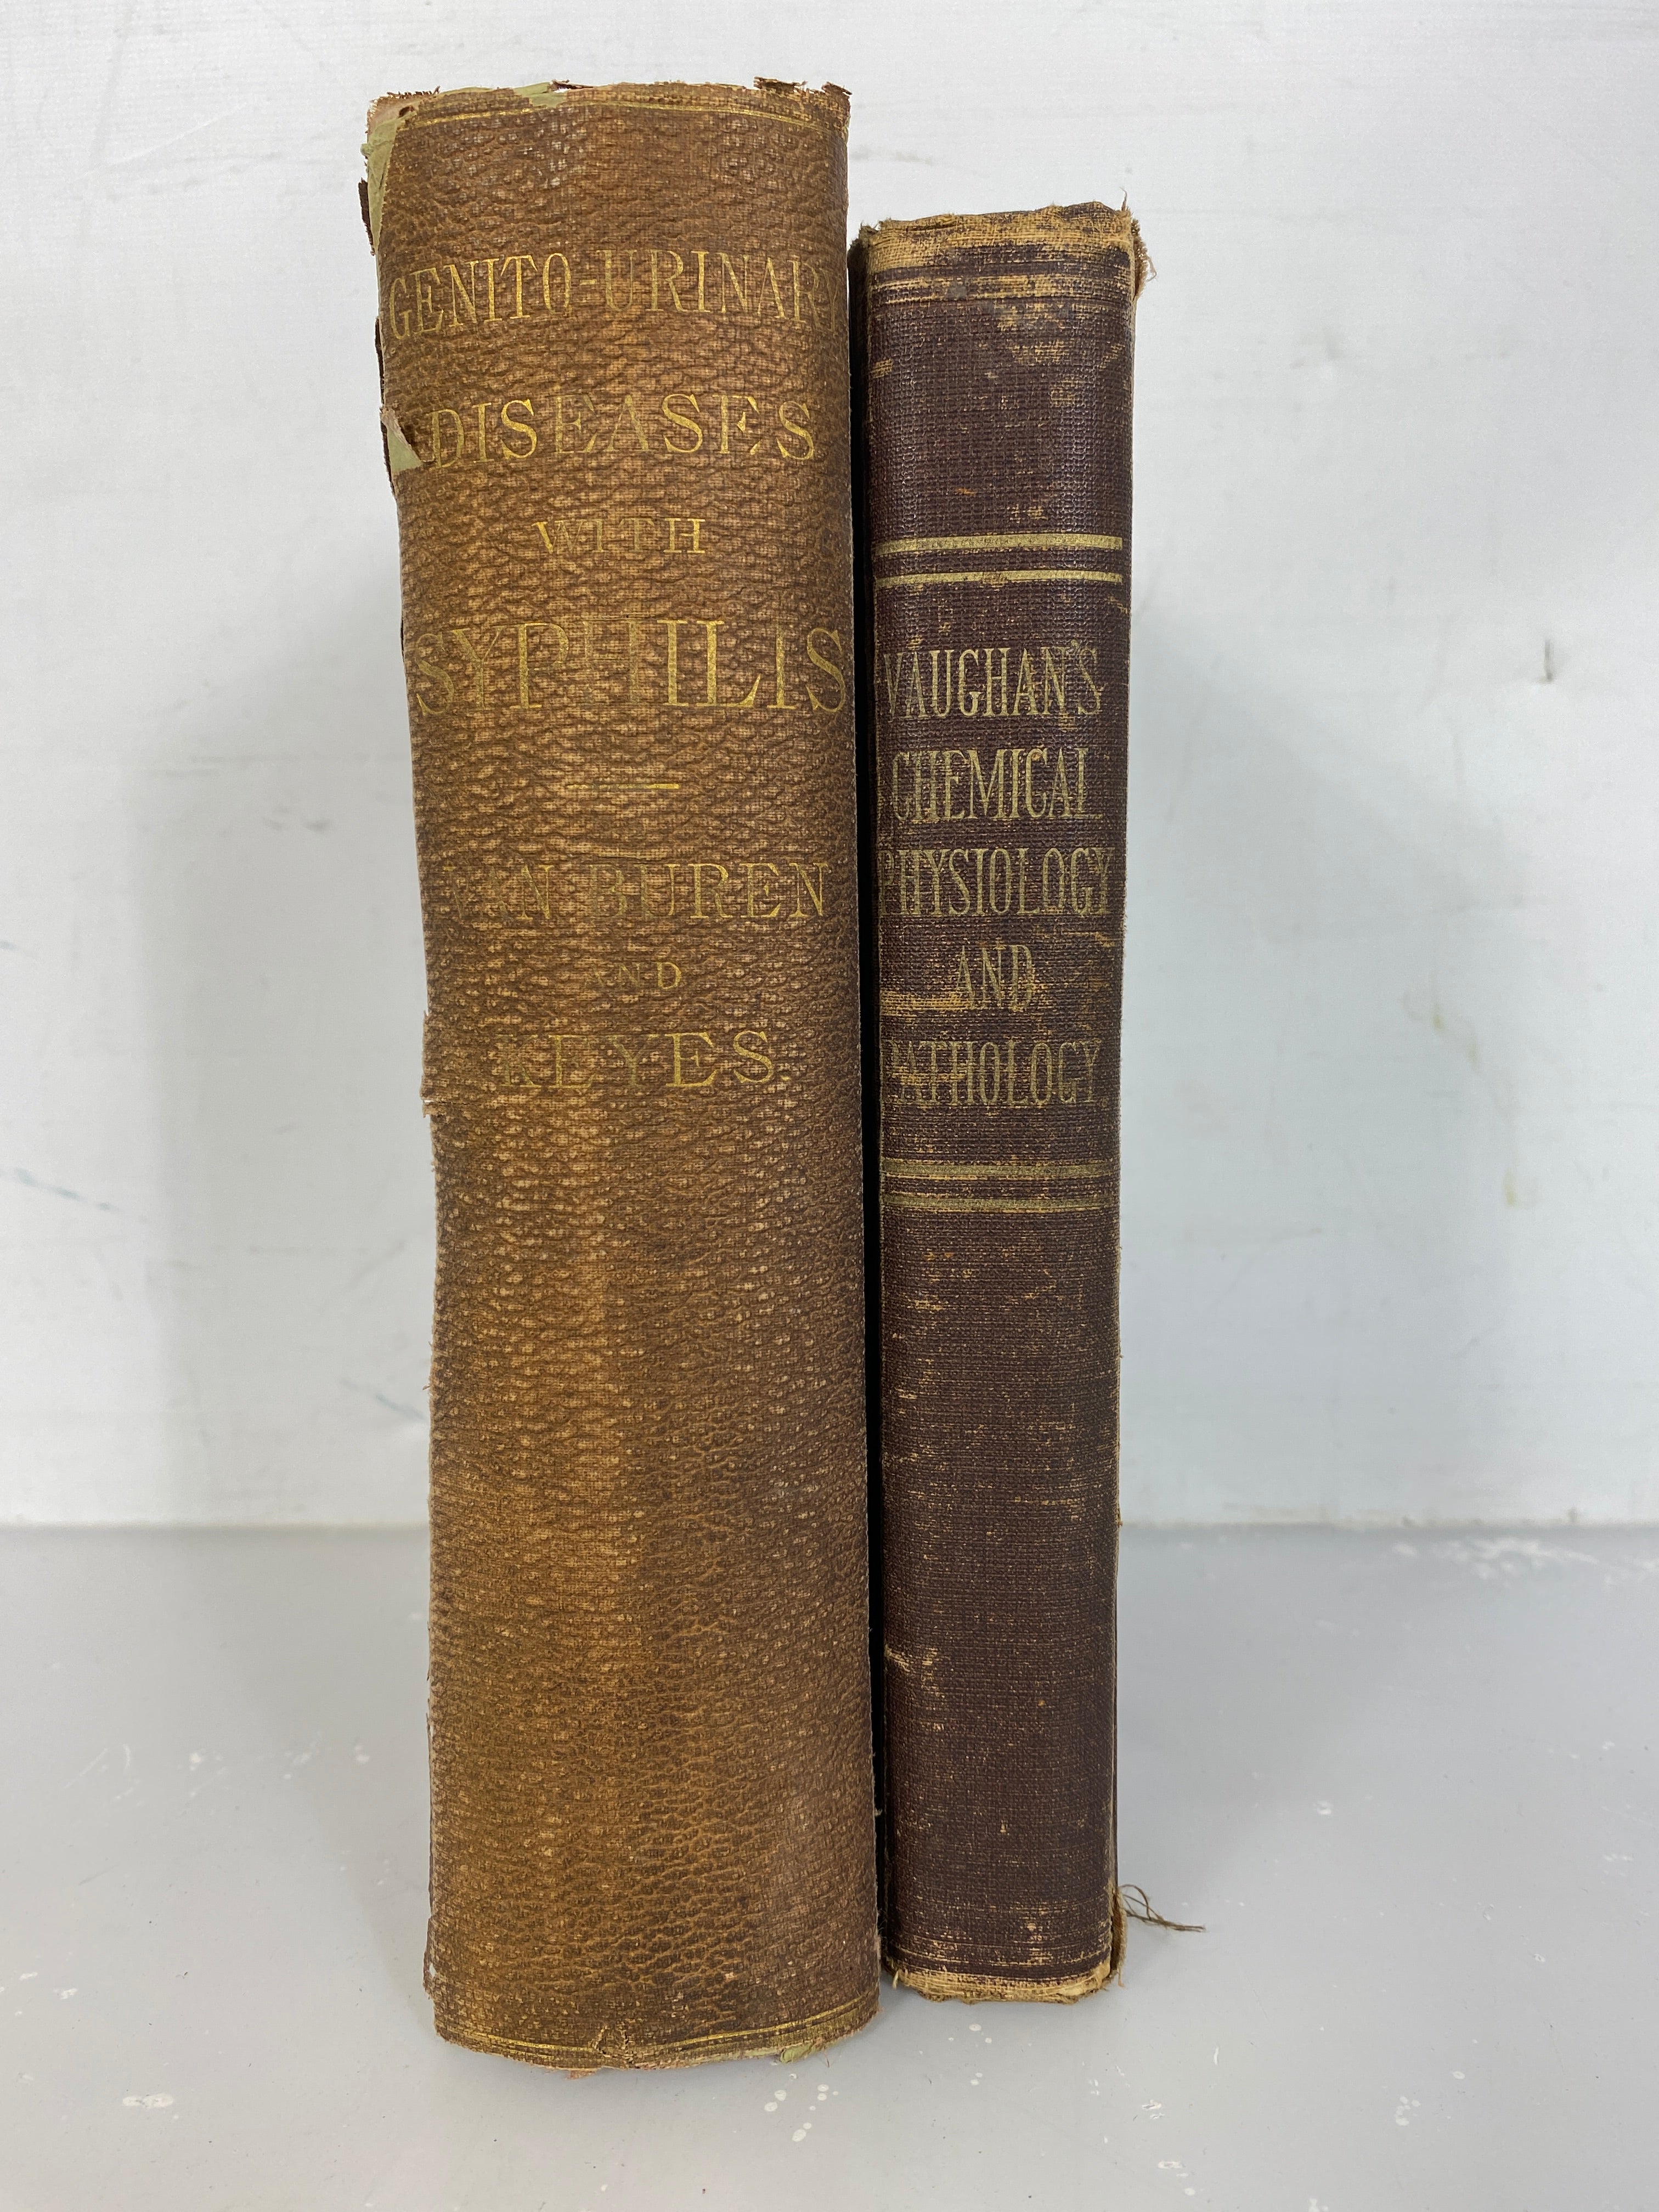 Lot of 2 Antique Medical Books:  (1874) and Hand-Book of Chemical Physiology and Pathology (1880) HCA Practical Treatise on the Surgical Diseases of the Genito-Urinary Organs